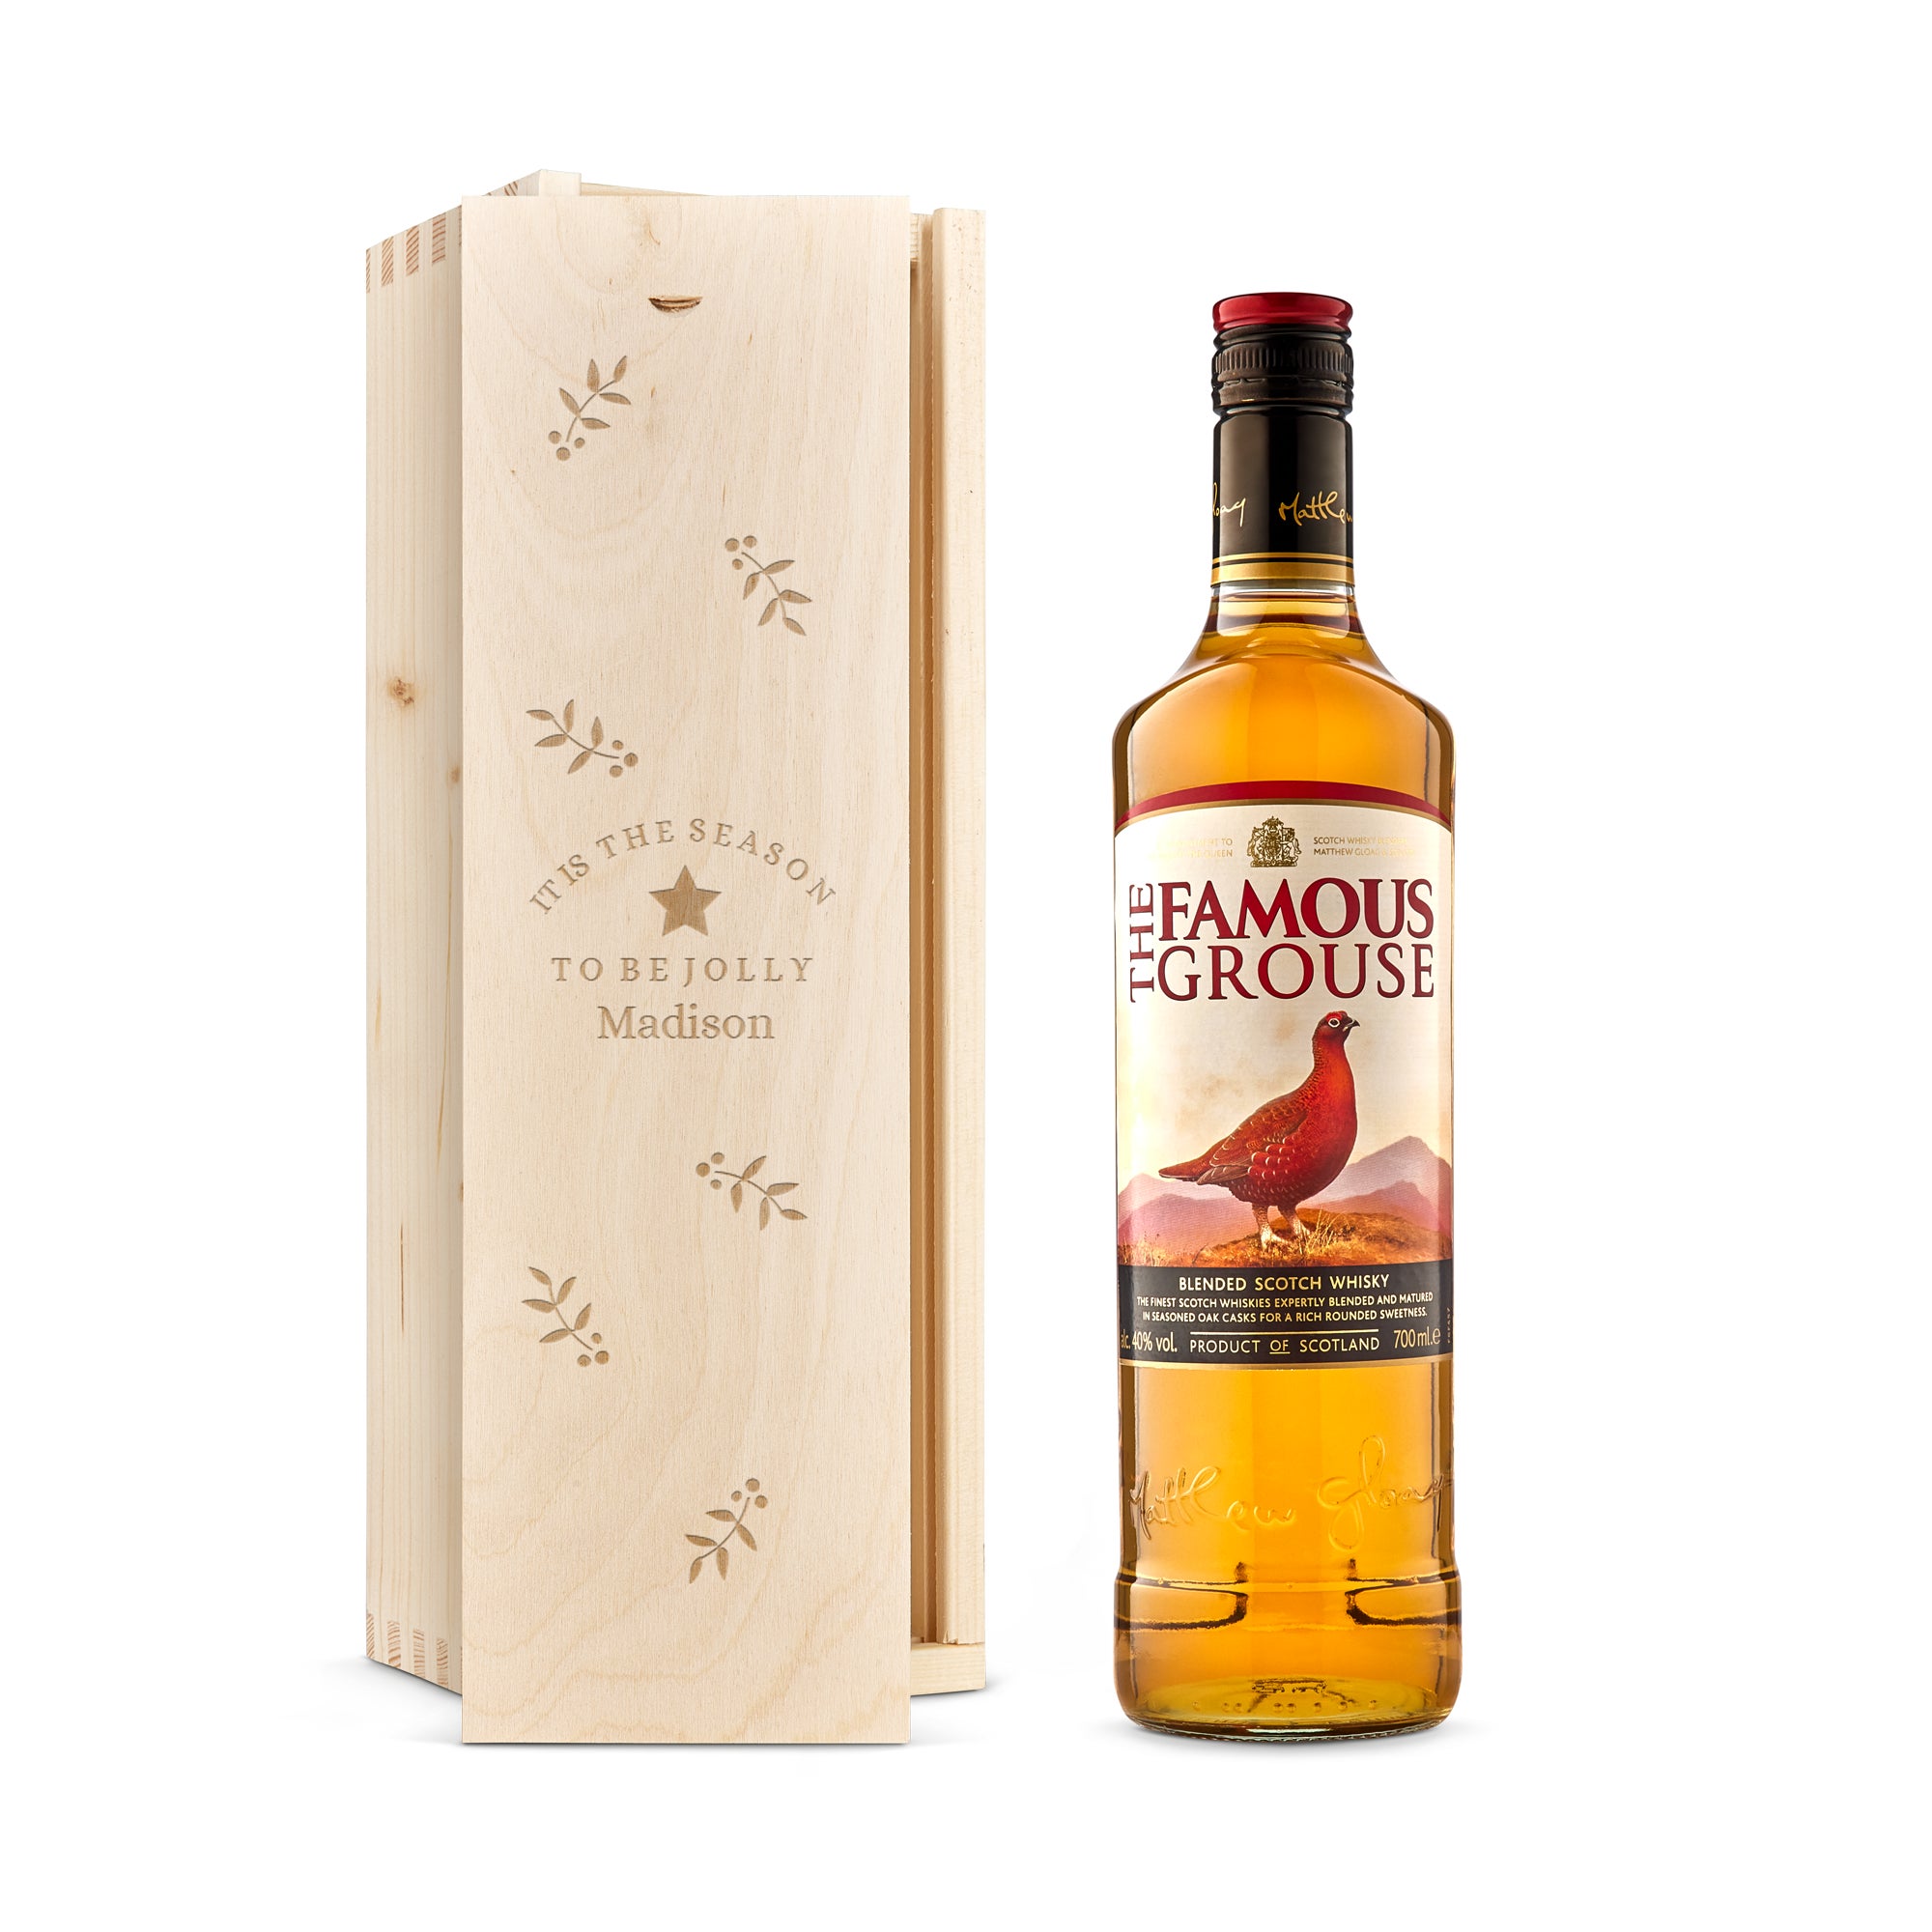 Personalised whiskey gift - Famous Grouse - Engraved wooden case